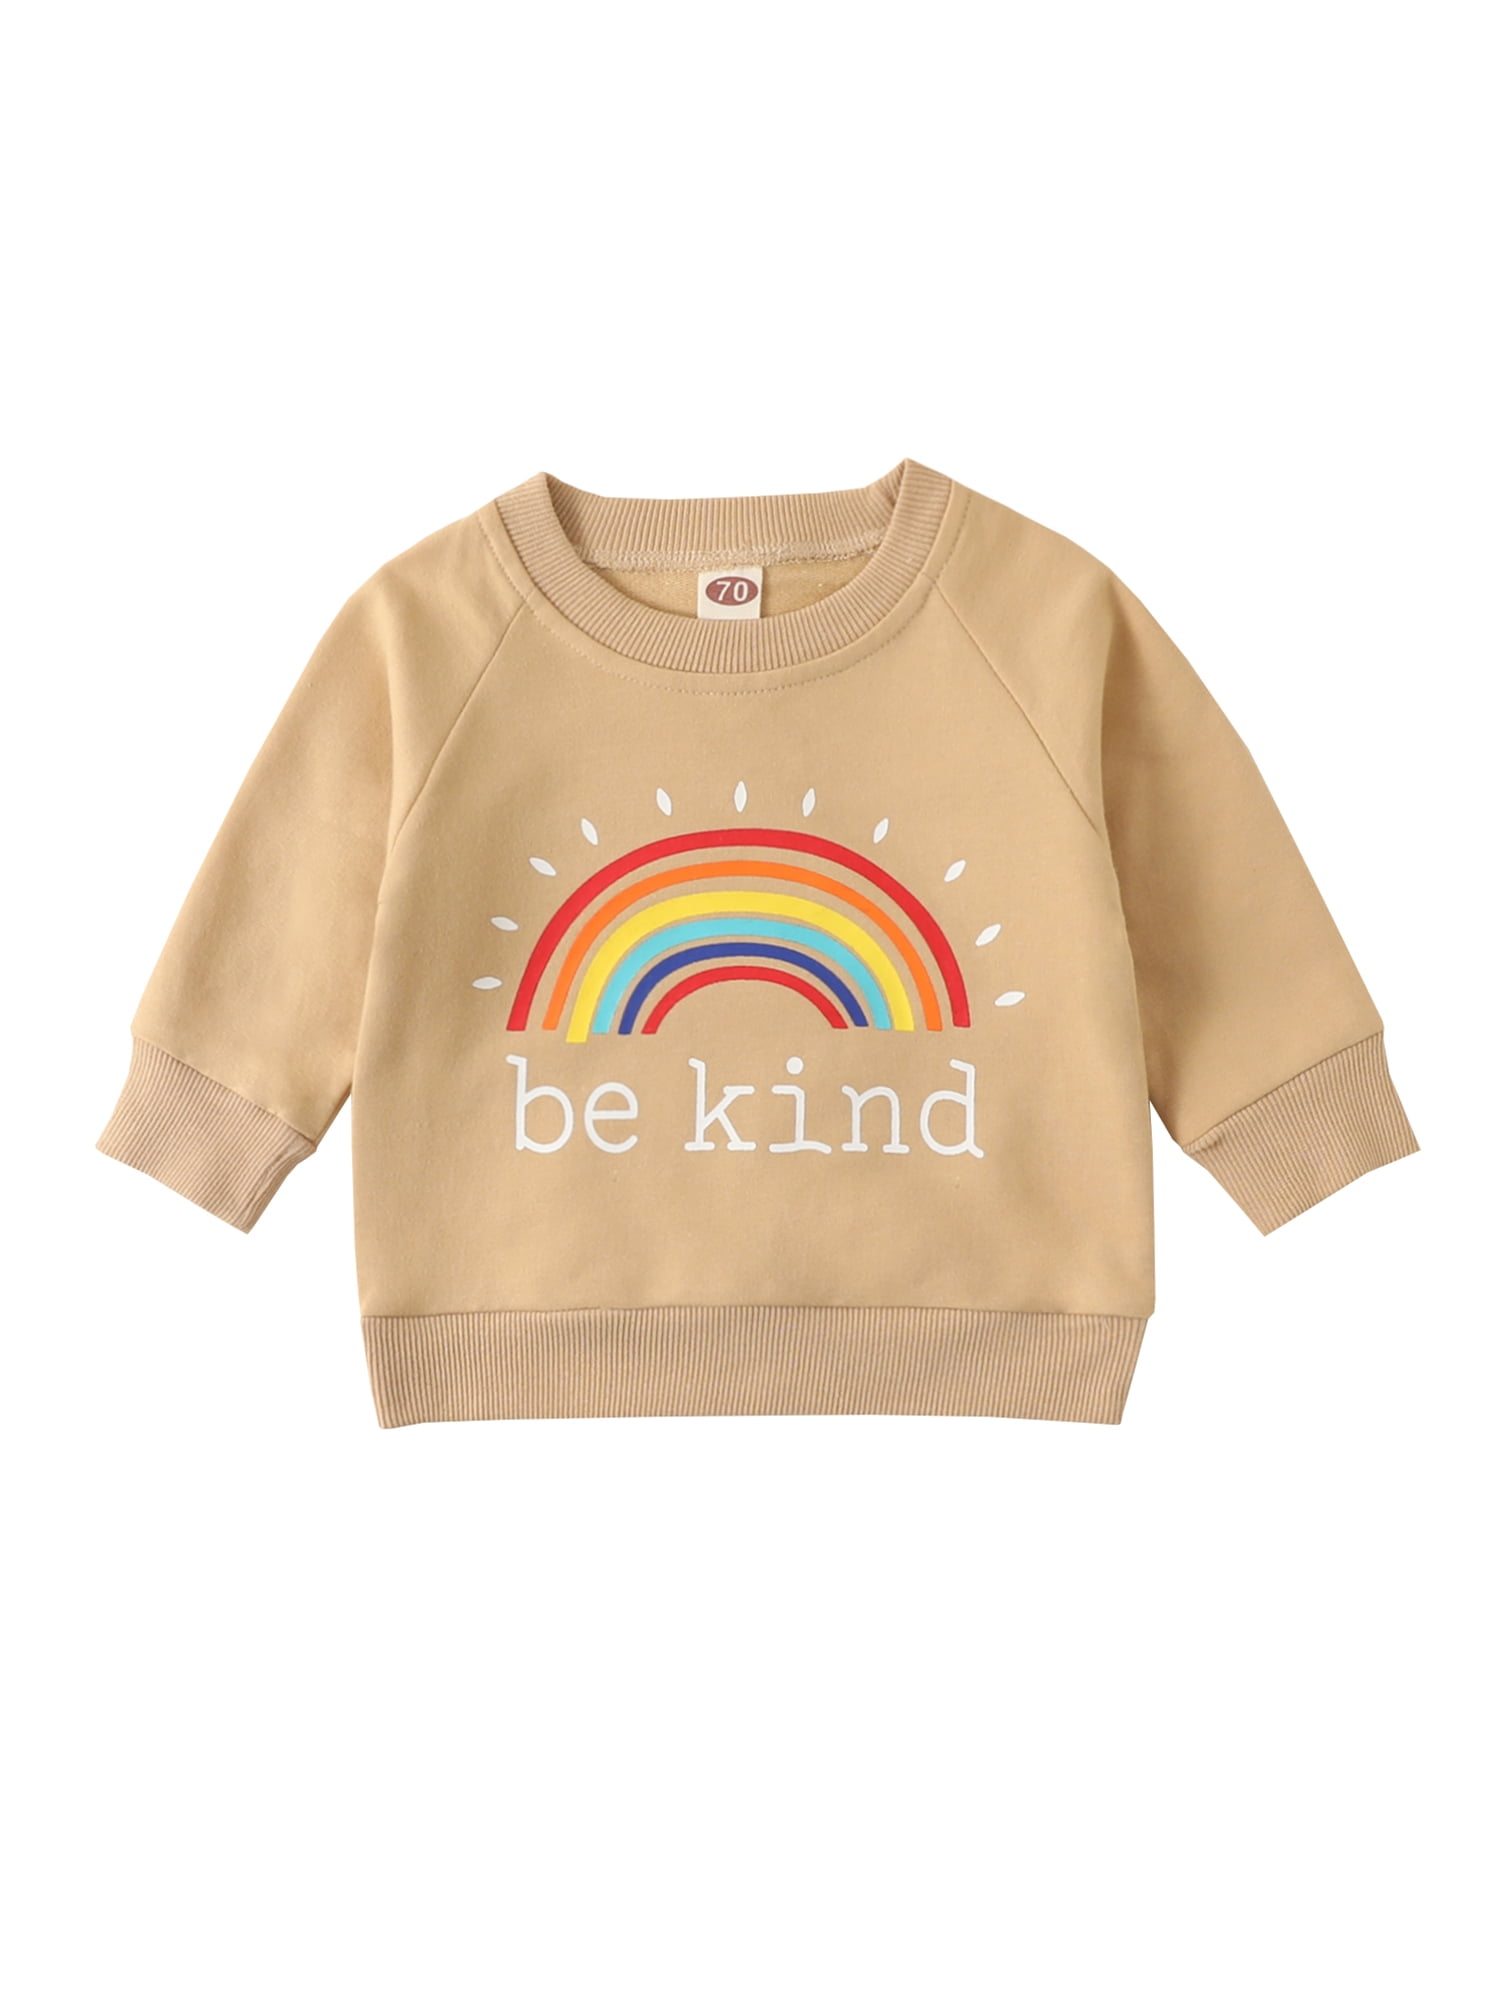 TheFound Autumn Toddler Baby Girls Boys Pullover Sweatshirt Flower/ Rainbow/ Letter Print Long Sleeve Tops Clothes